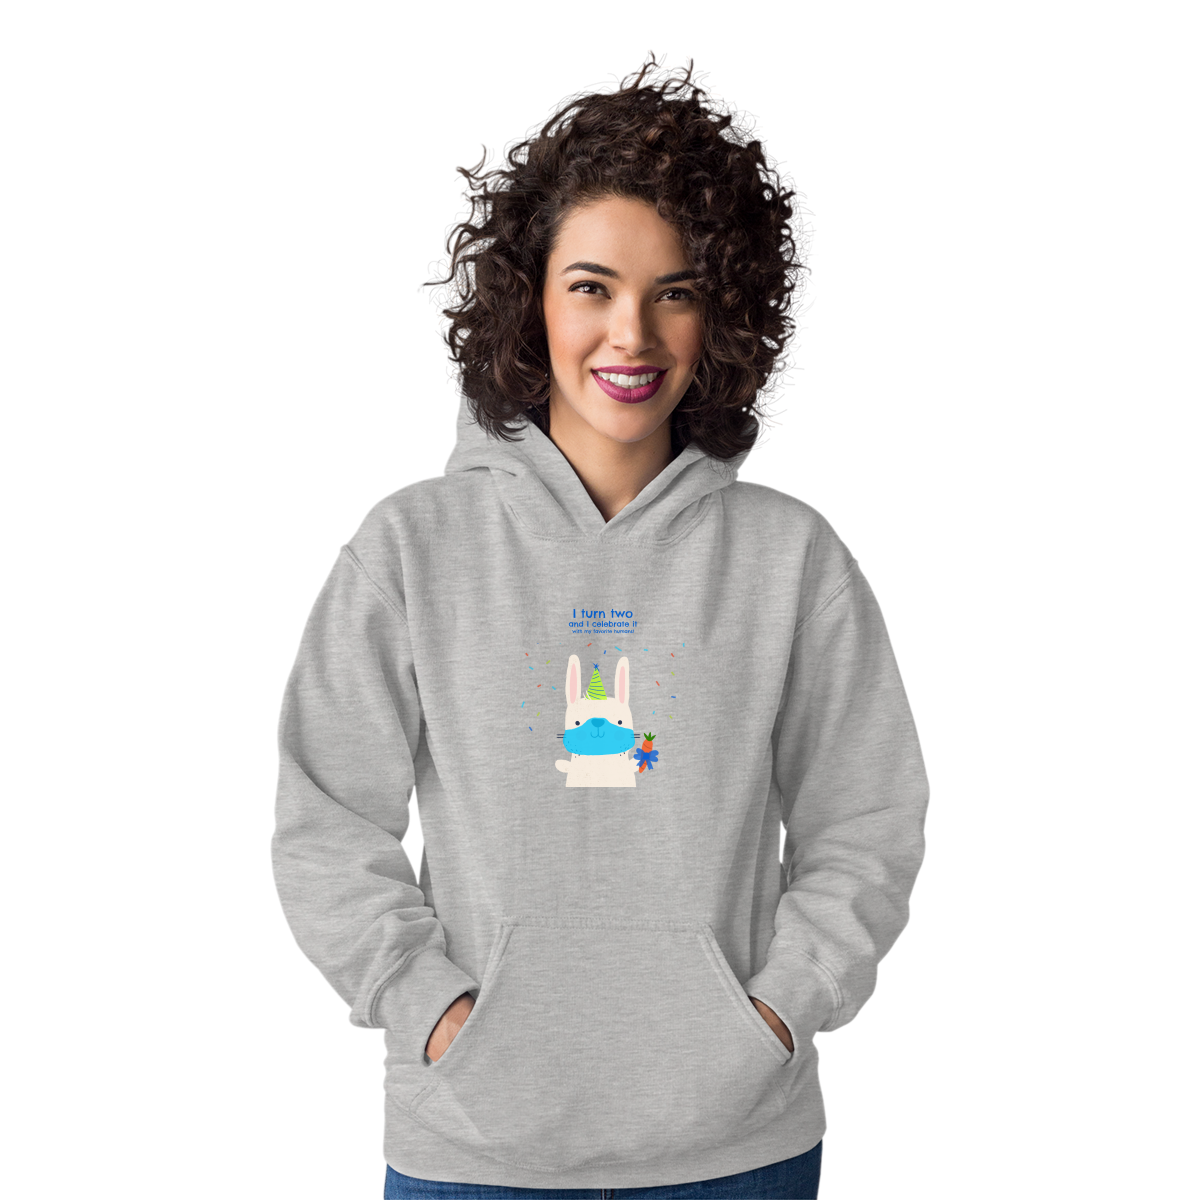 I turn two and I celebrate it with my favorite humans  Unisex Hoodie | Gray